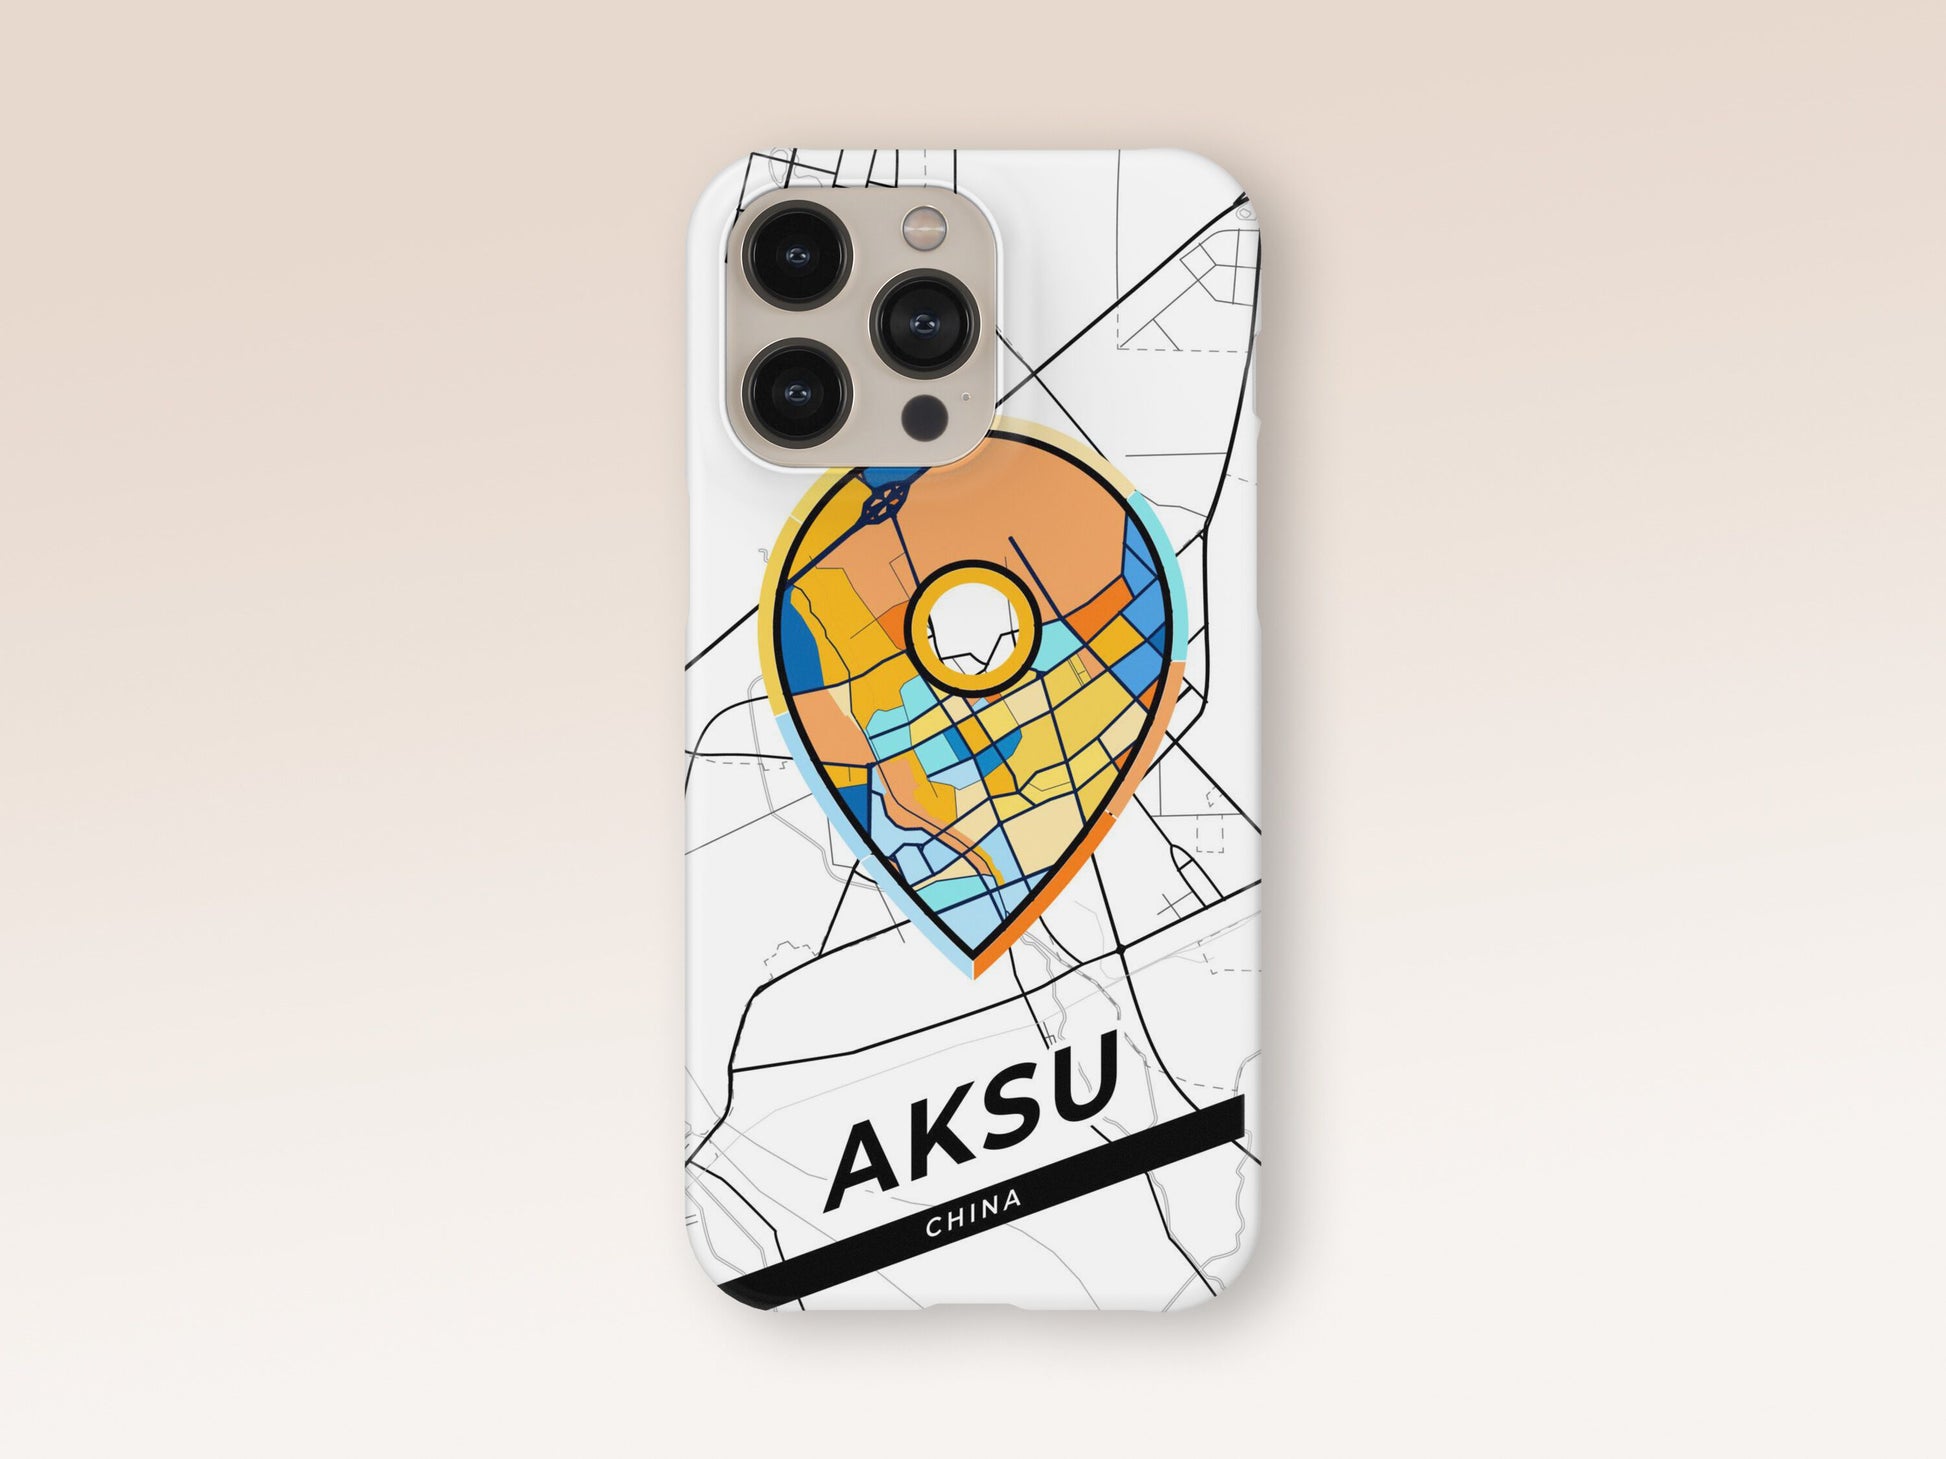 Aksu China slim phone case with colorful icon. Birthday, wedding or housewarming gift. Couple match cases. 1